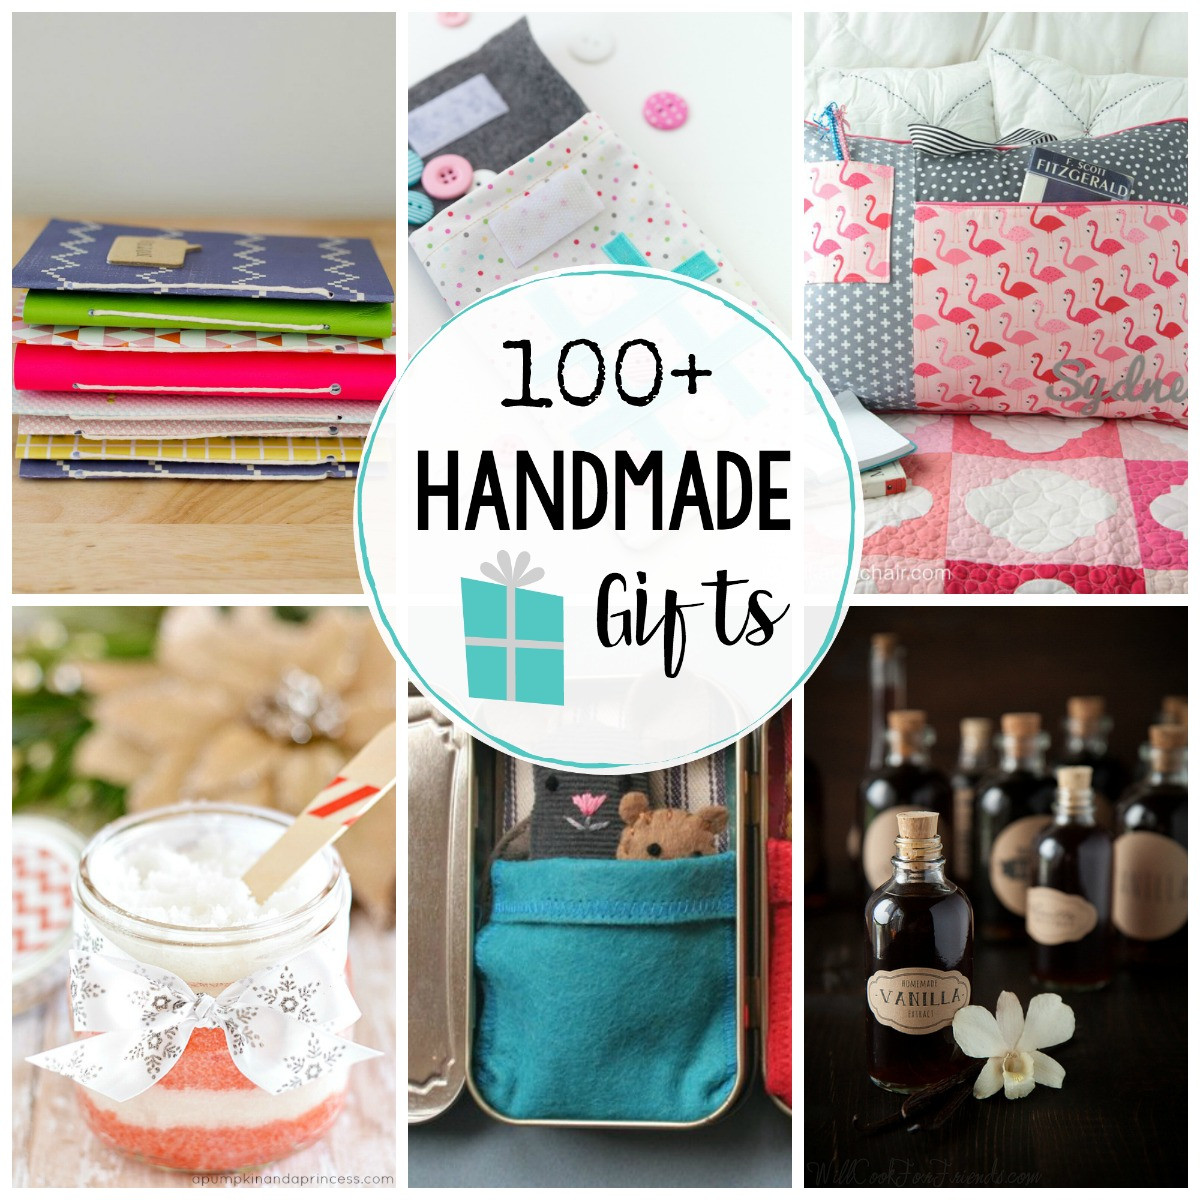 DIY Christmas Gifts For Husband
 Tons of Handmade Gifts 100 Ideas for Everyone on Your List